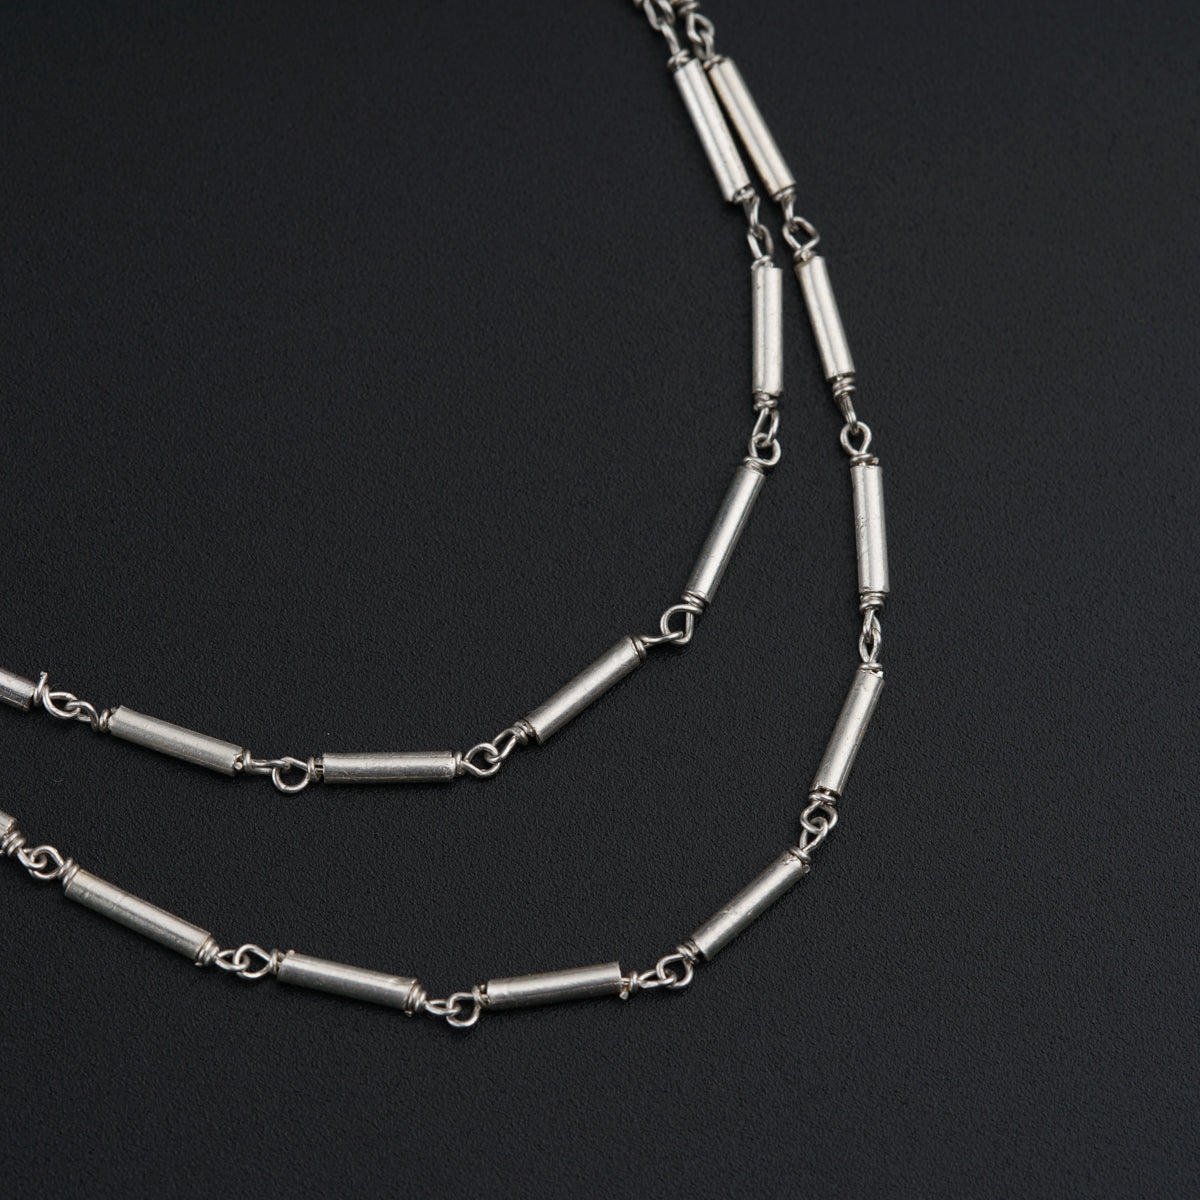 a long silver chain with links on a black surface